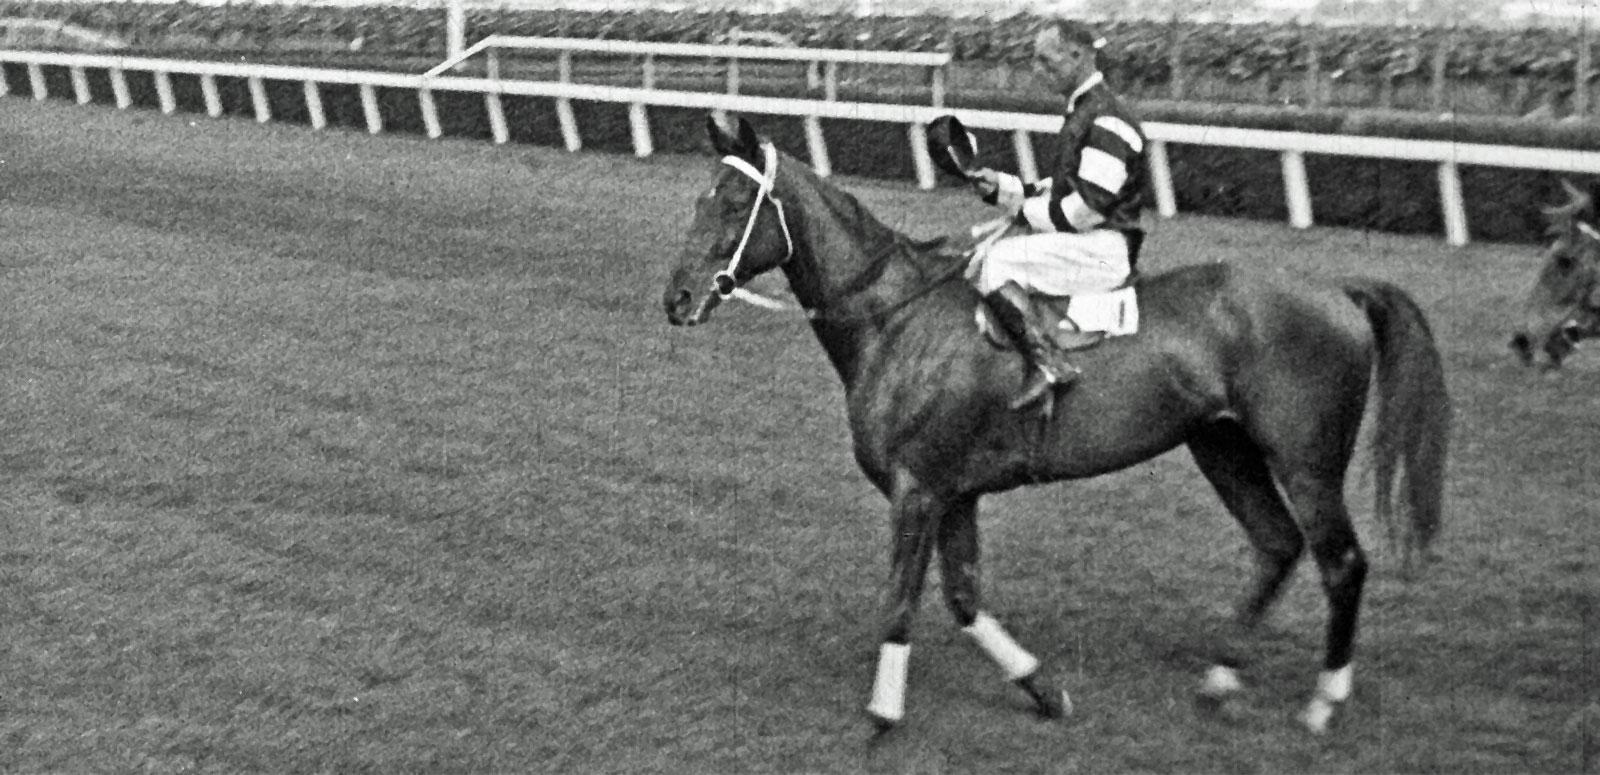 Phar Lap being ridden by jockey Jim Pike just after winning the 1930 Melbourne Cup race